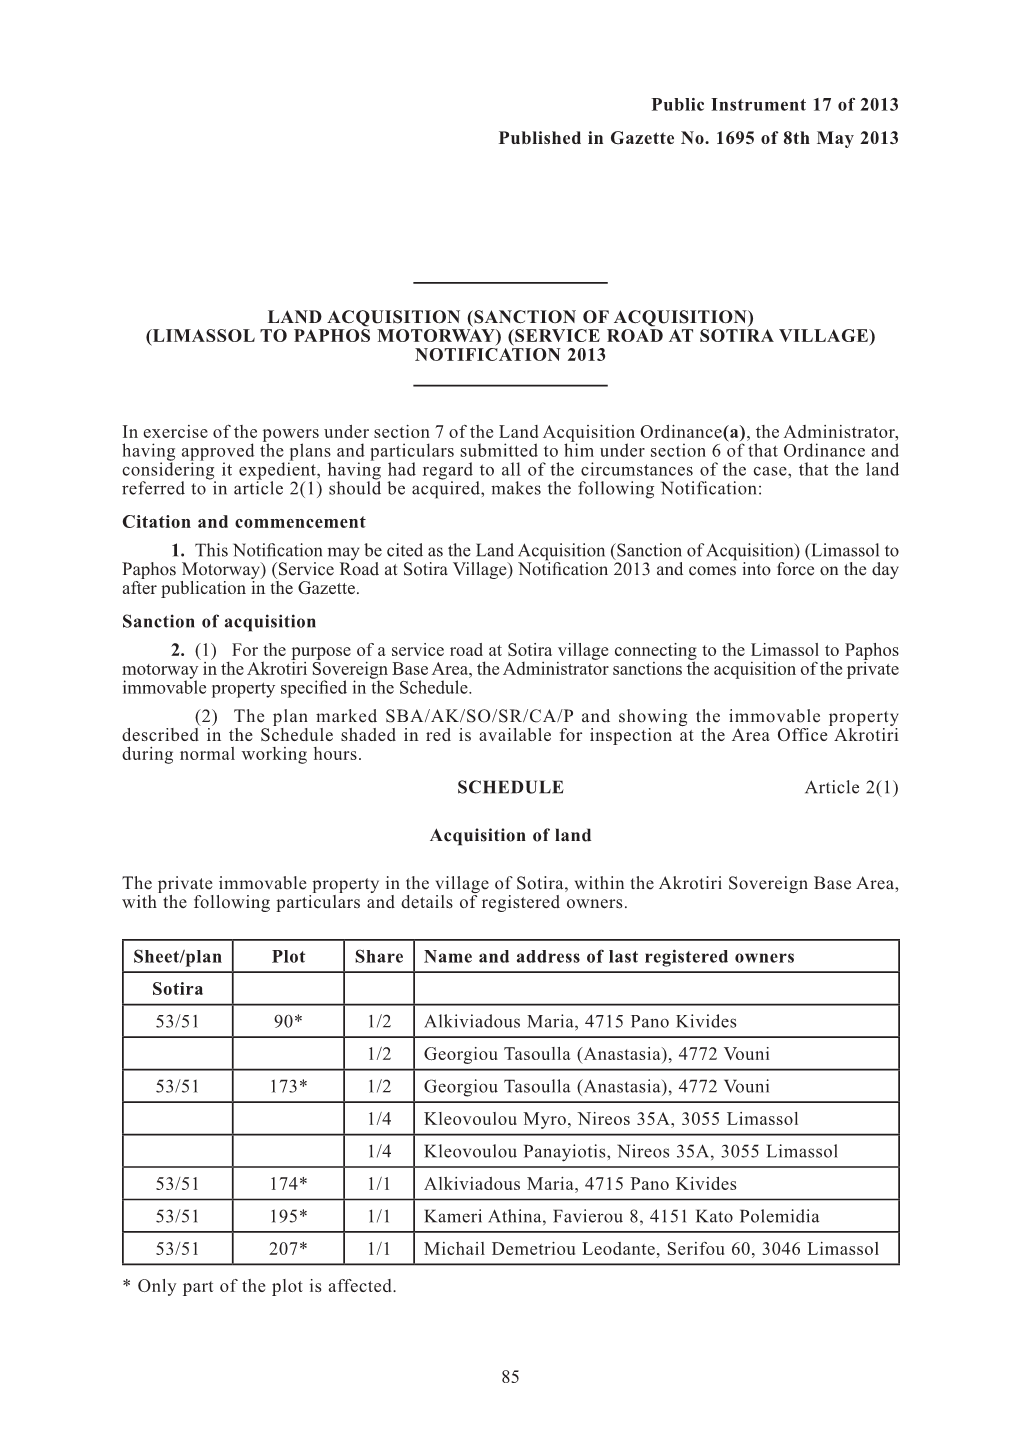 85 Public Instrument 17 of 2013 Published in Gazette No. 1695 of 8Th May 2013 LAND ACQUISITION (SANCTION of ACQUISITION) (LIMASS